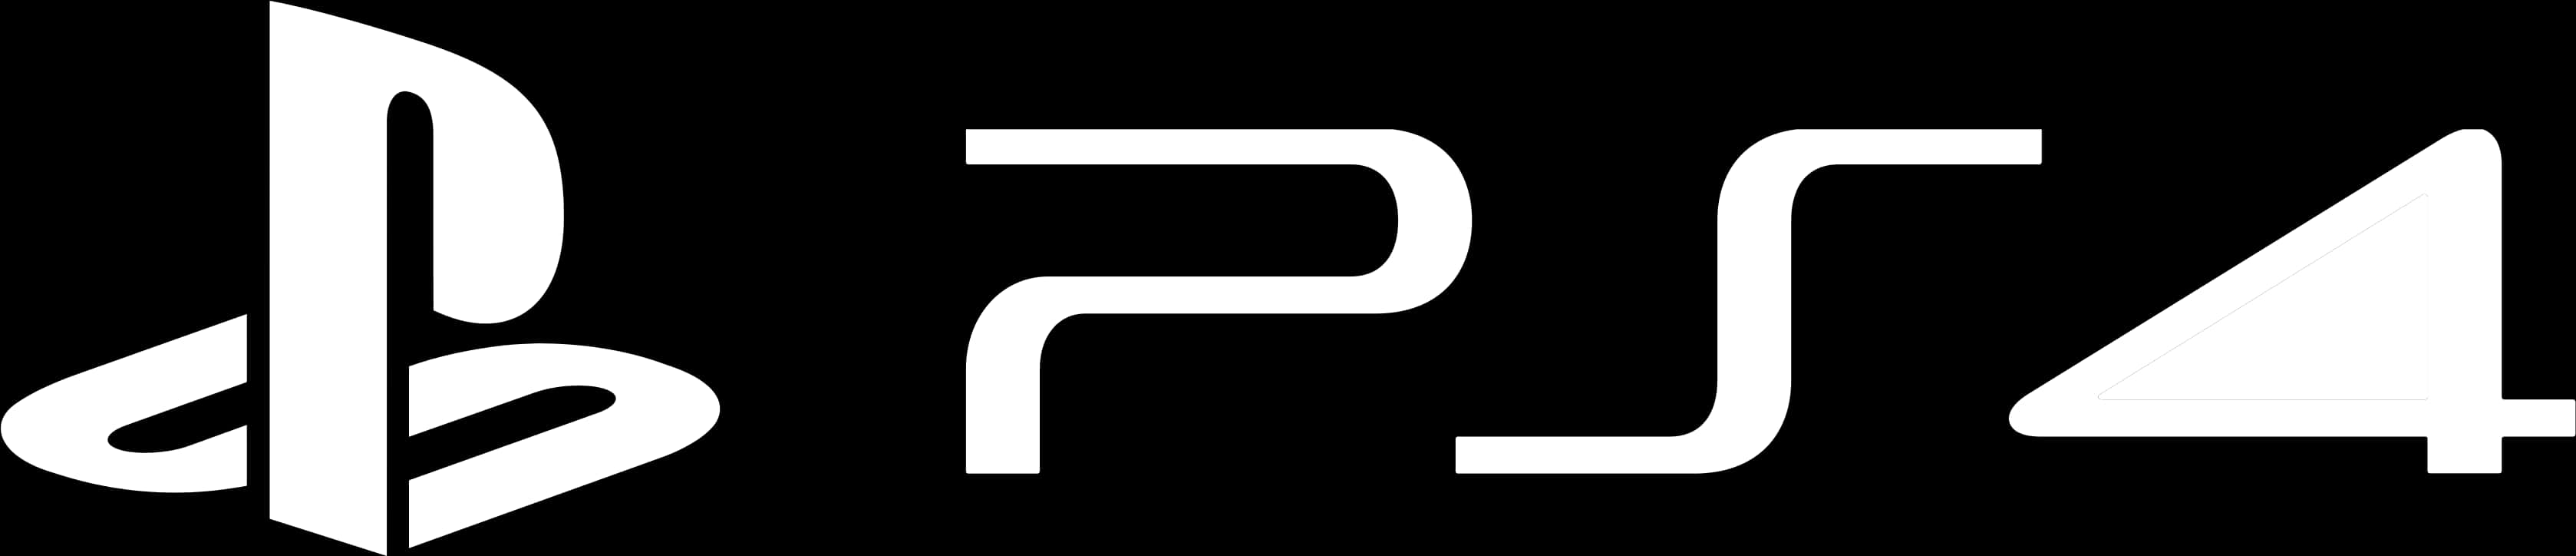 Play Station P S4 Logo Blackand White PNG